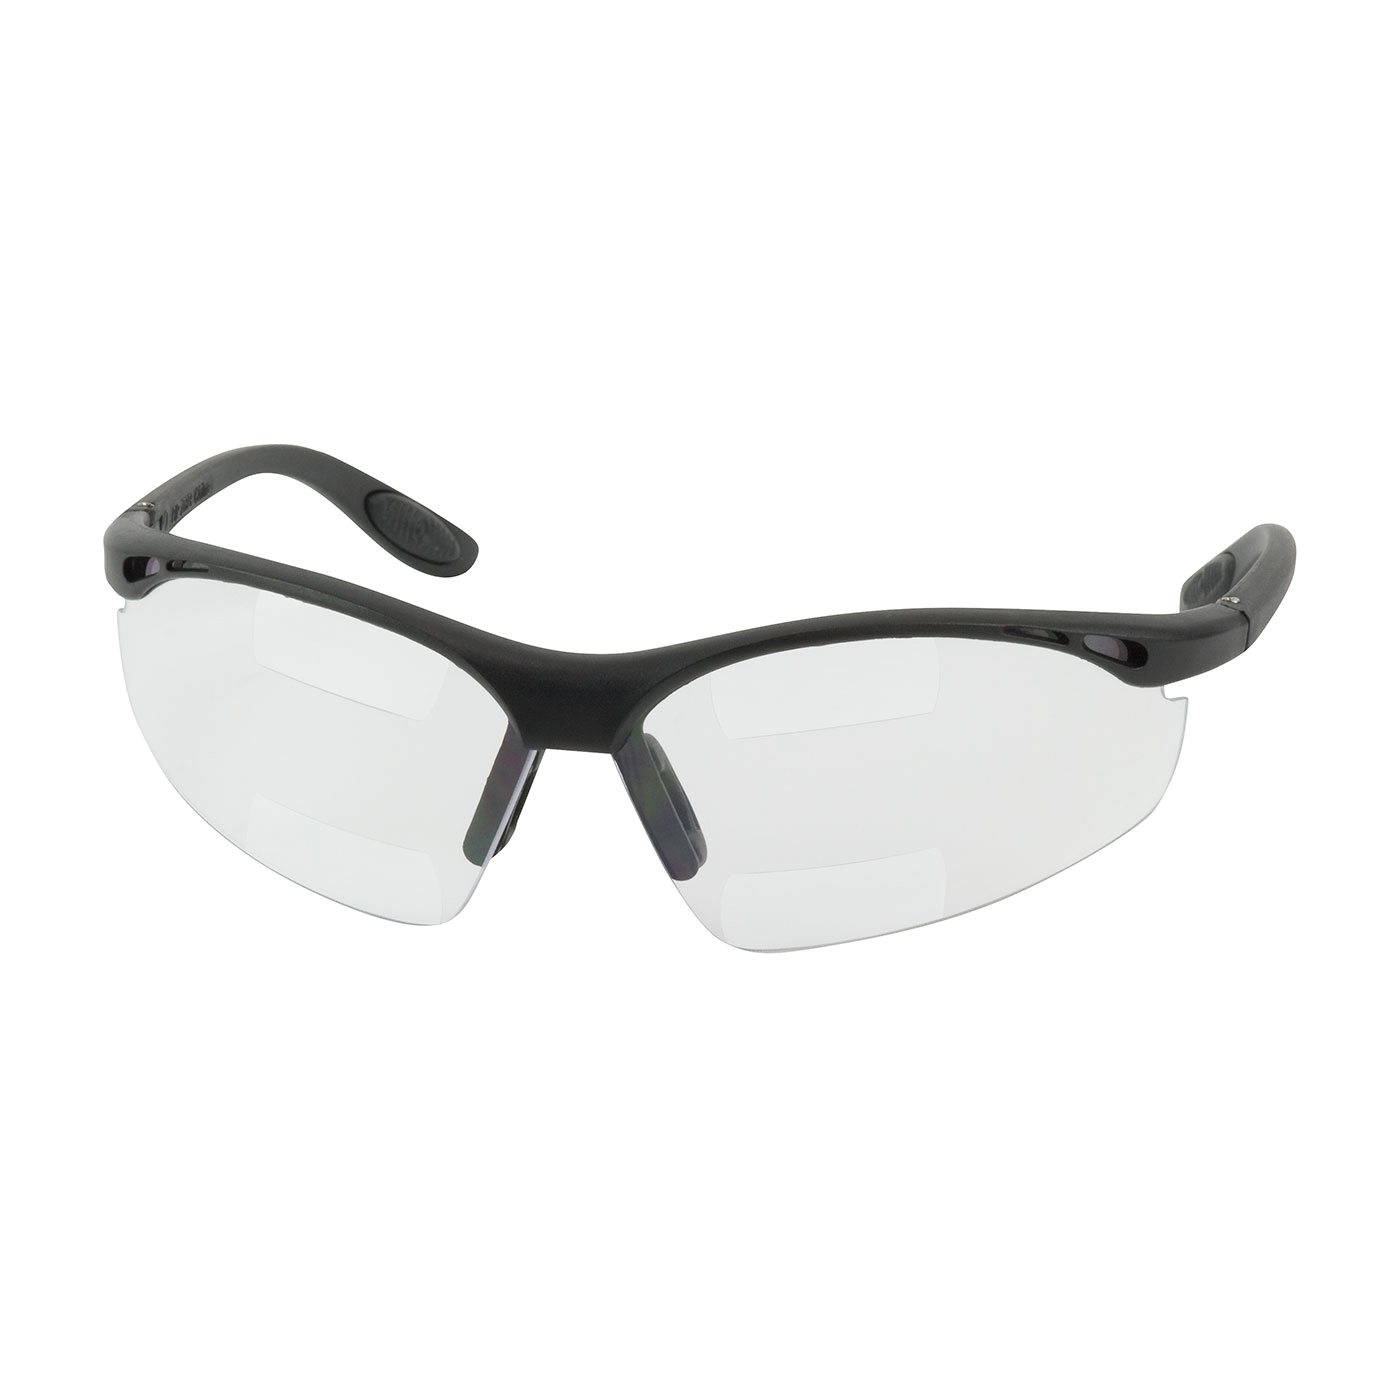 Bouton® 250-25-1515 Double Mag Readers™ 250-25 Dual Safety Reading Eyewear, +1.5 Diopter, Clear Lens, Black, Nylon Frame, Polycarbonate Lens, 99.9% UVA/UVB UV Protection, ANSI Z87.1+/Z87.1-2015